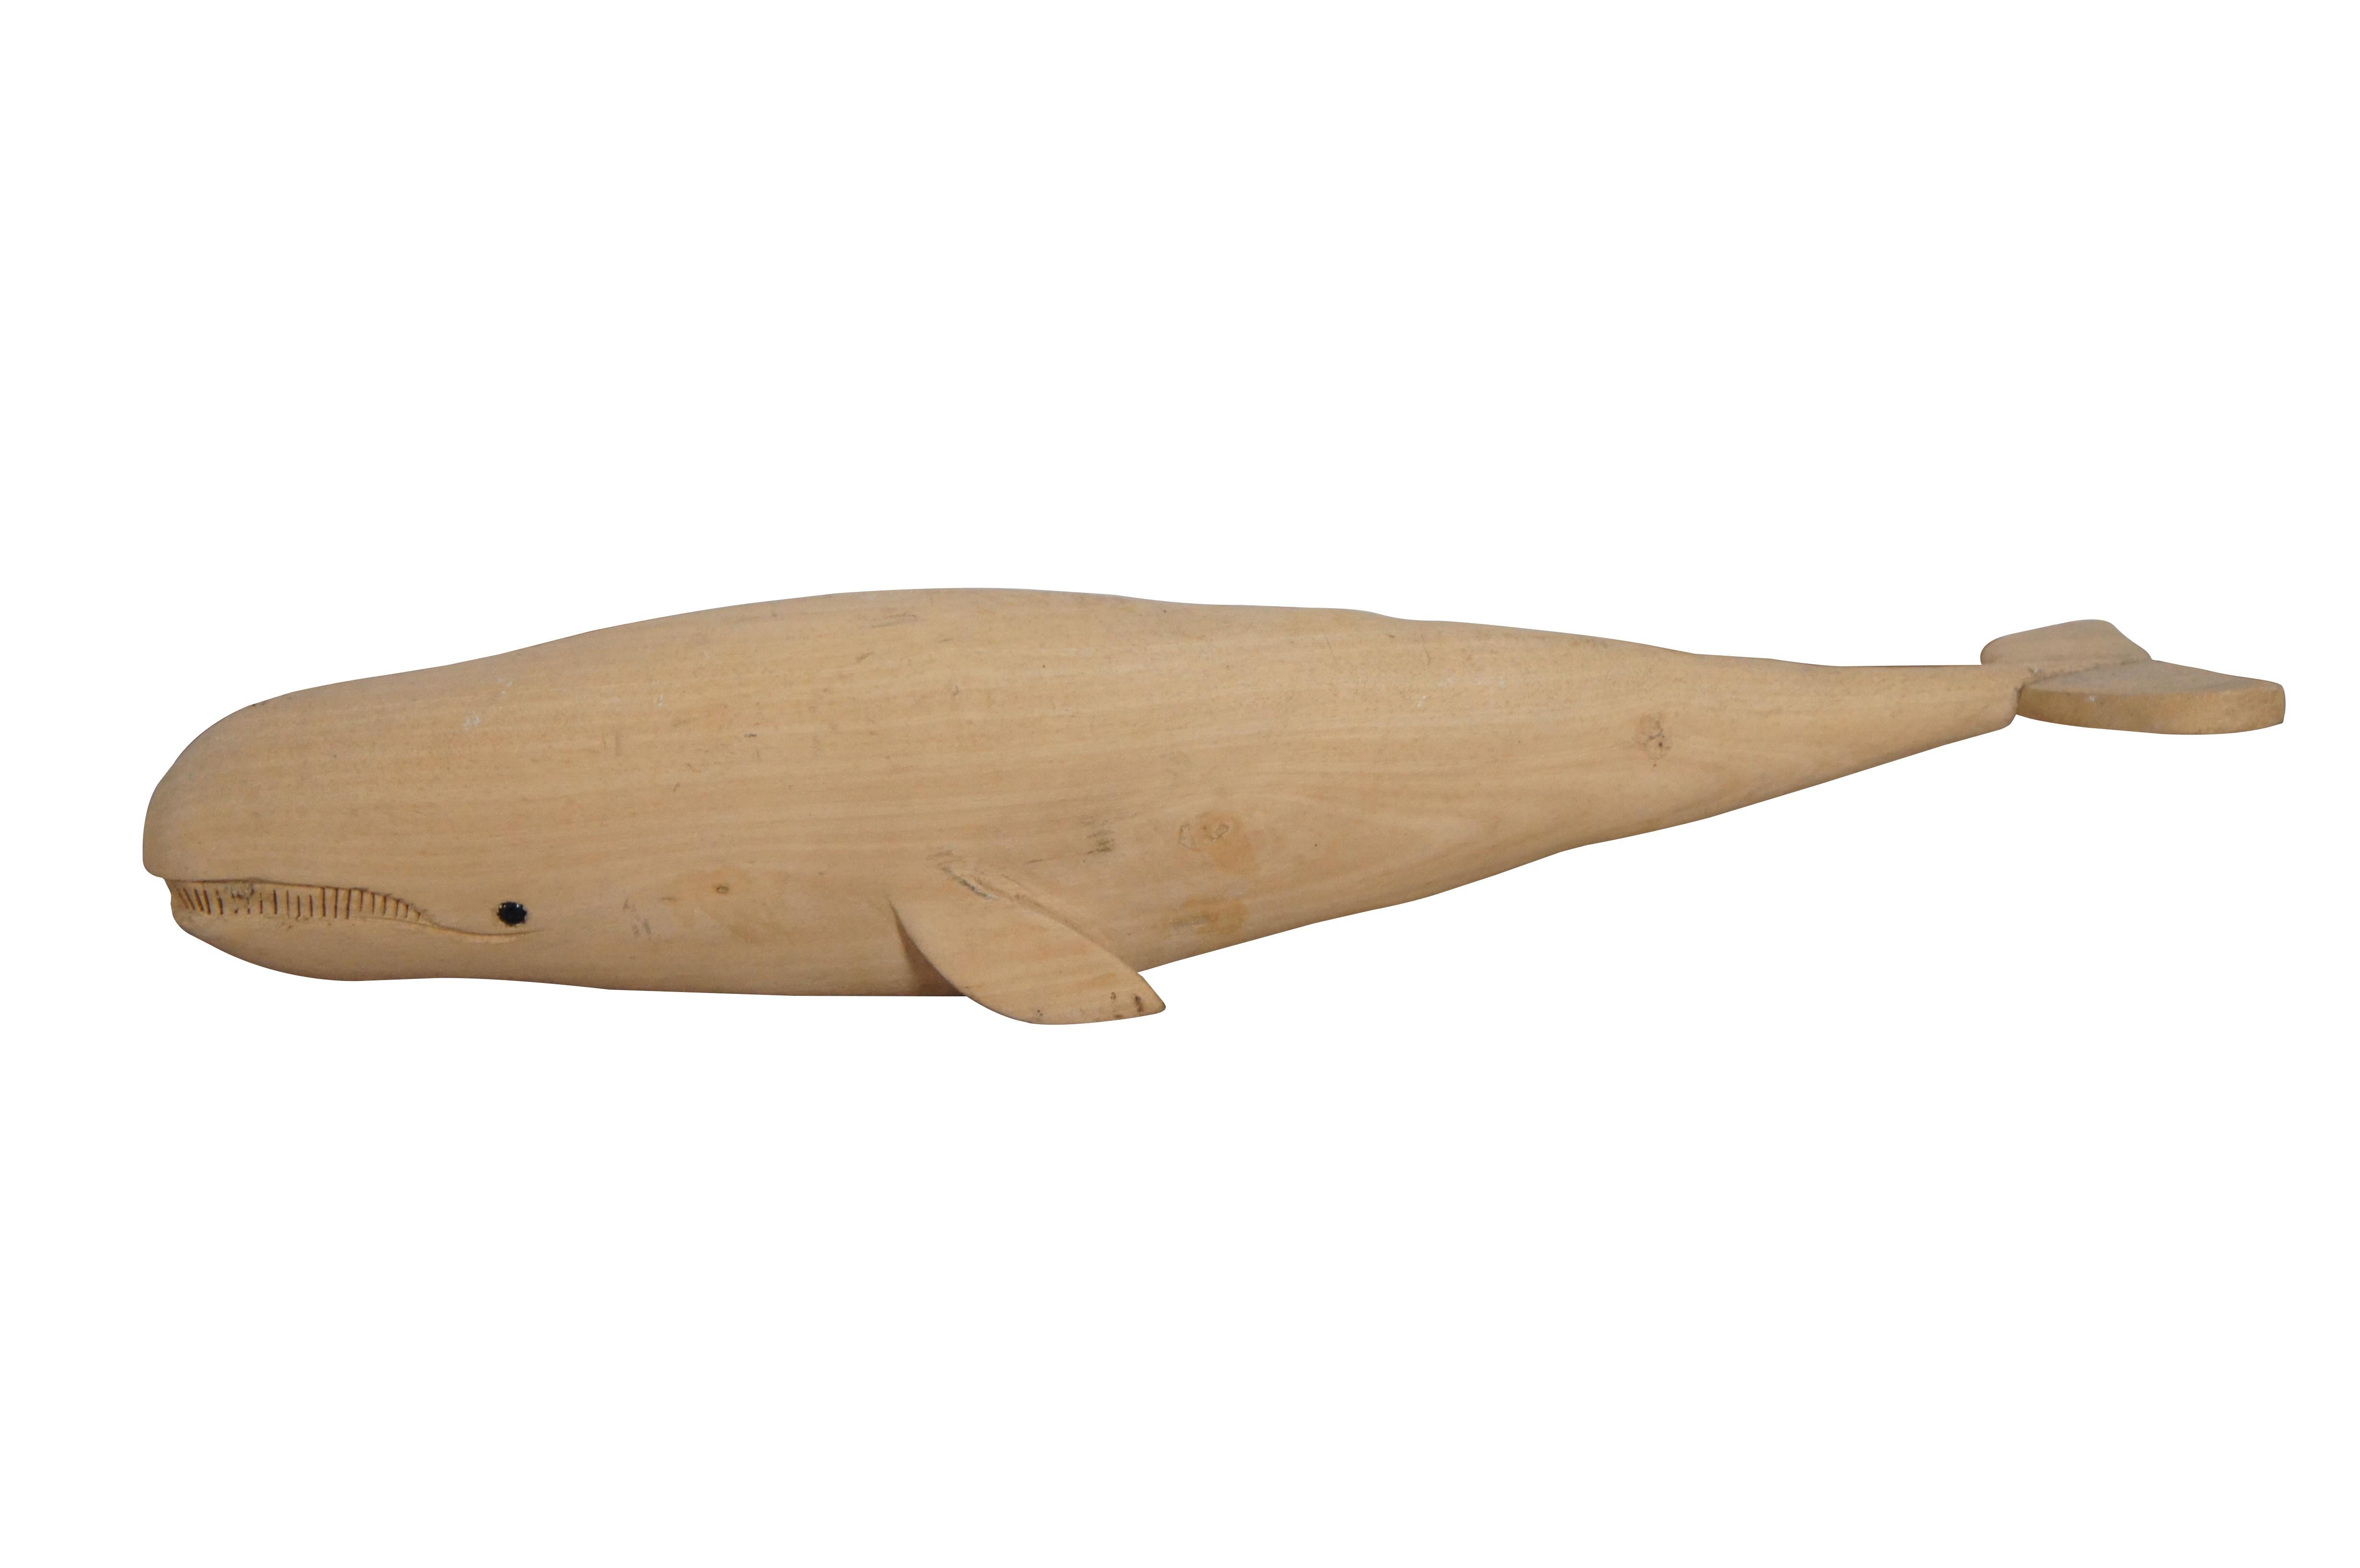 Pair of mid to late 20th century hand carved teak wood whale figurines - one sperm whale with inlaid eyes and one humpback whale perched on a small burl.

Dimensions:
Sperm Whale - 14